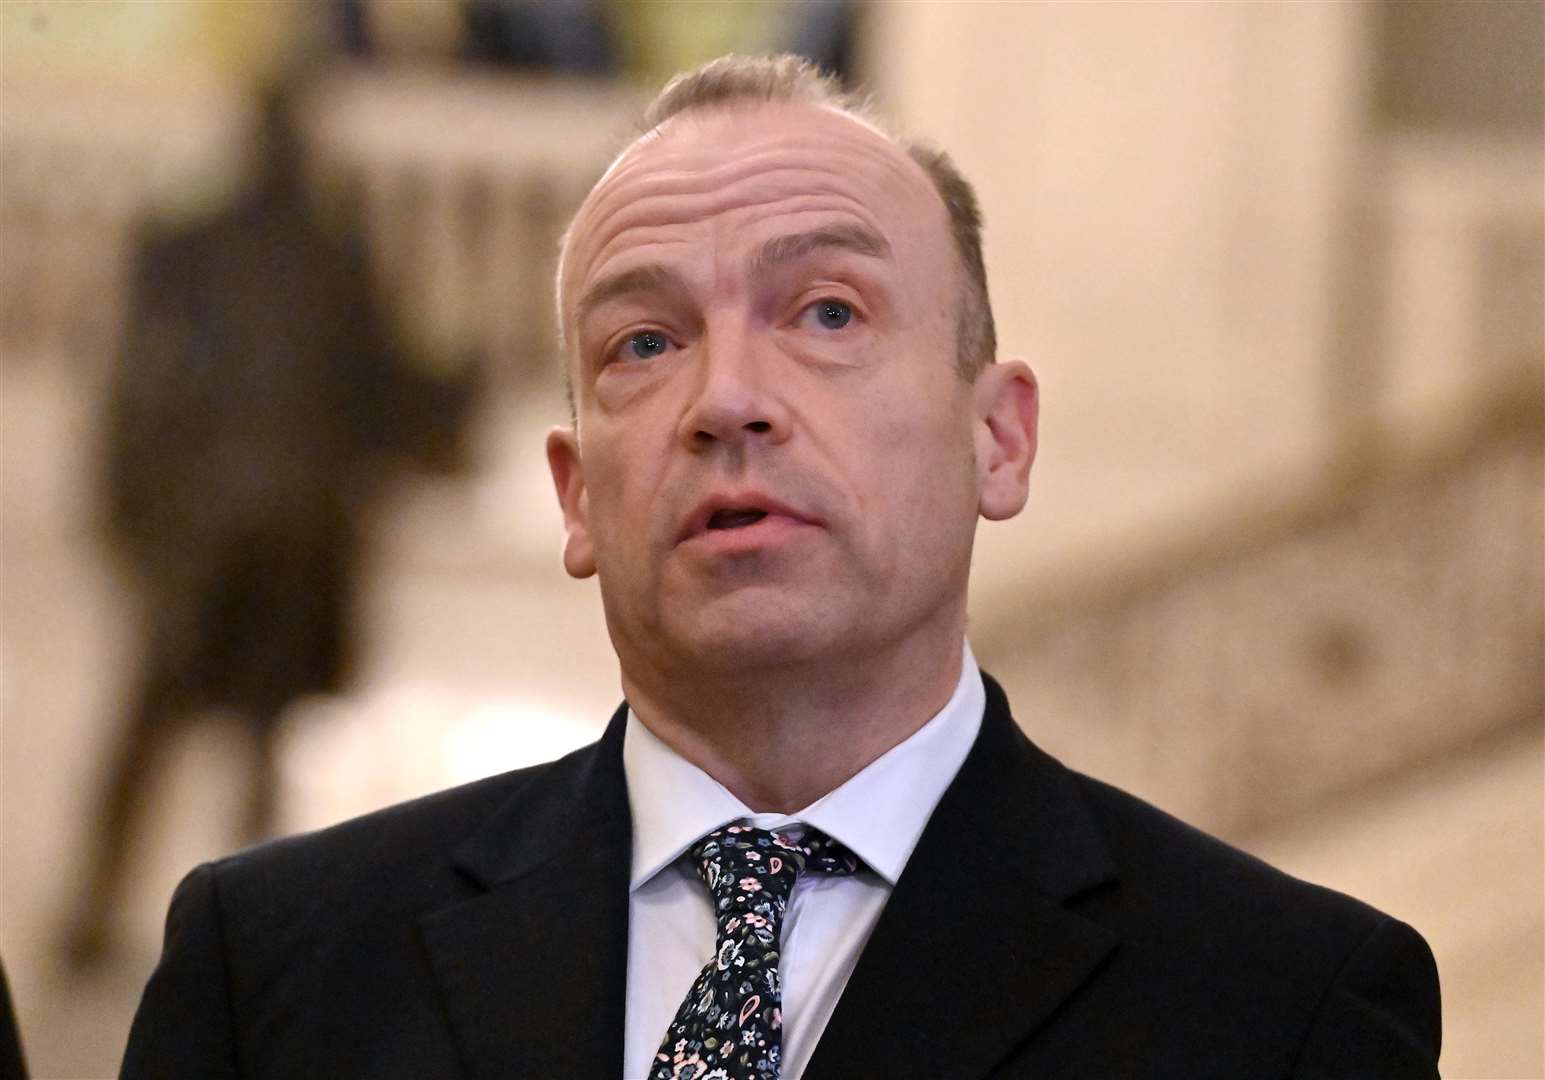 Northern Ireland Secretary Chris Heaton-Harris speaking to the media at the Northern Ireland Assembly (Oliver McVeigh/PA)